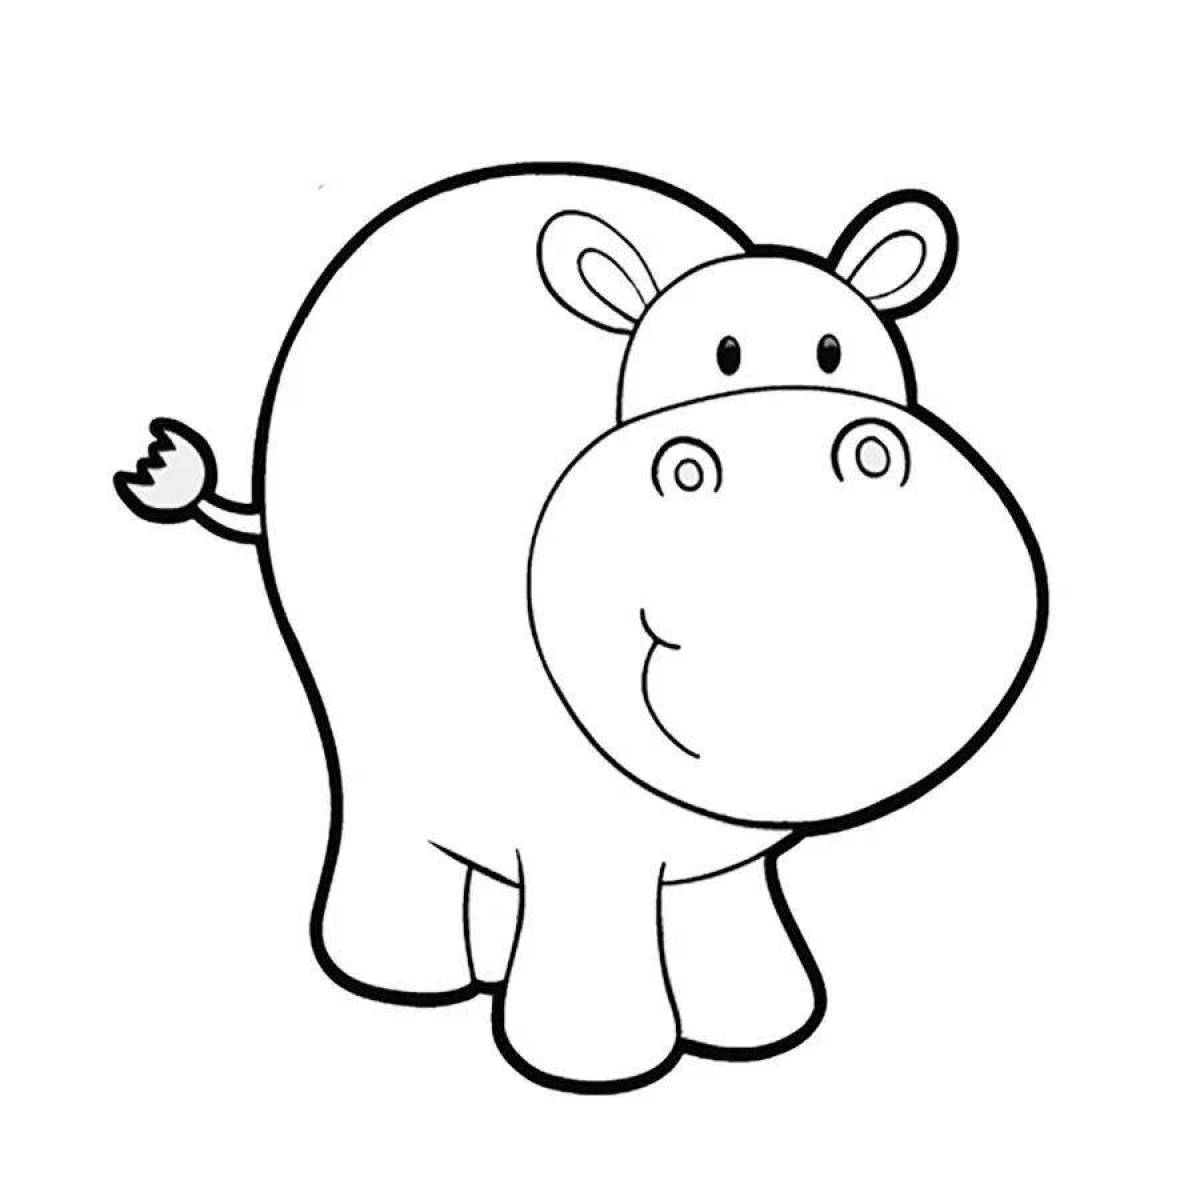 Exquisite hippo coloring book for kids